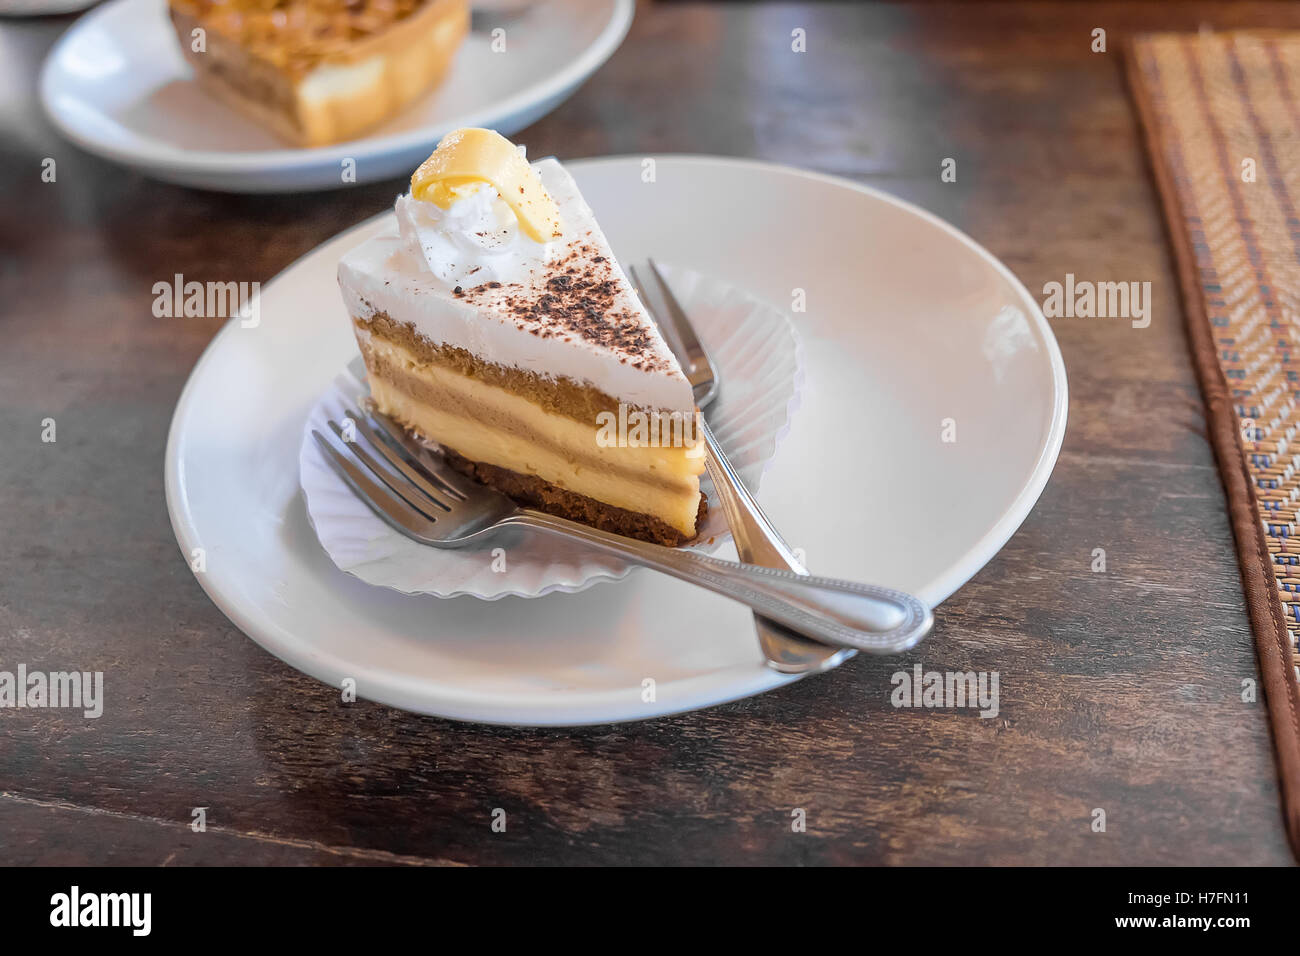 A Slice Of Tiramisu Cake On A Plate And Ready To Eat In Coffee Shop Stock Photo Alamy